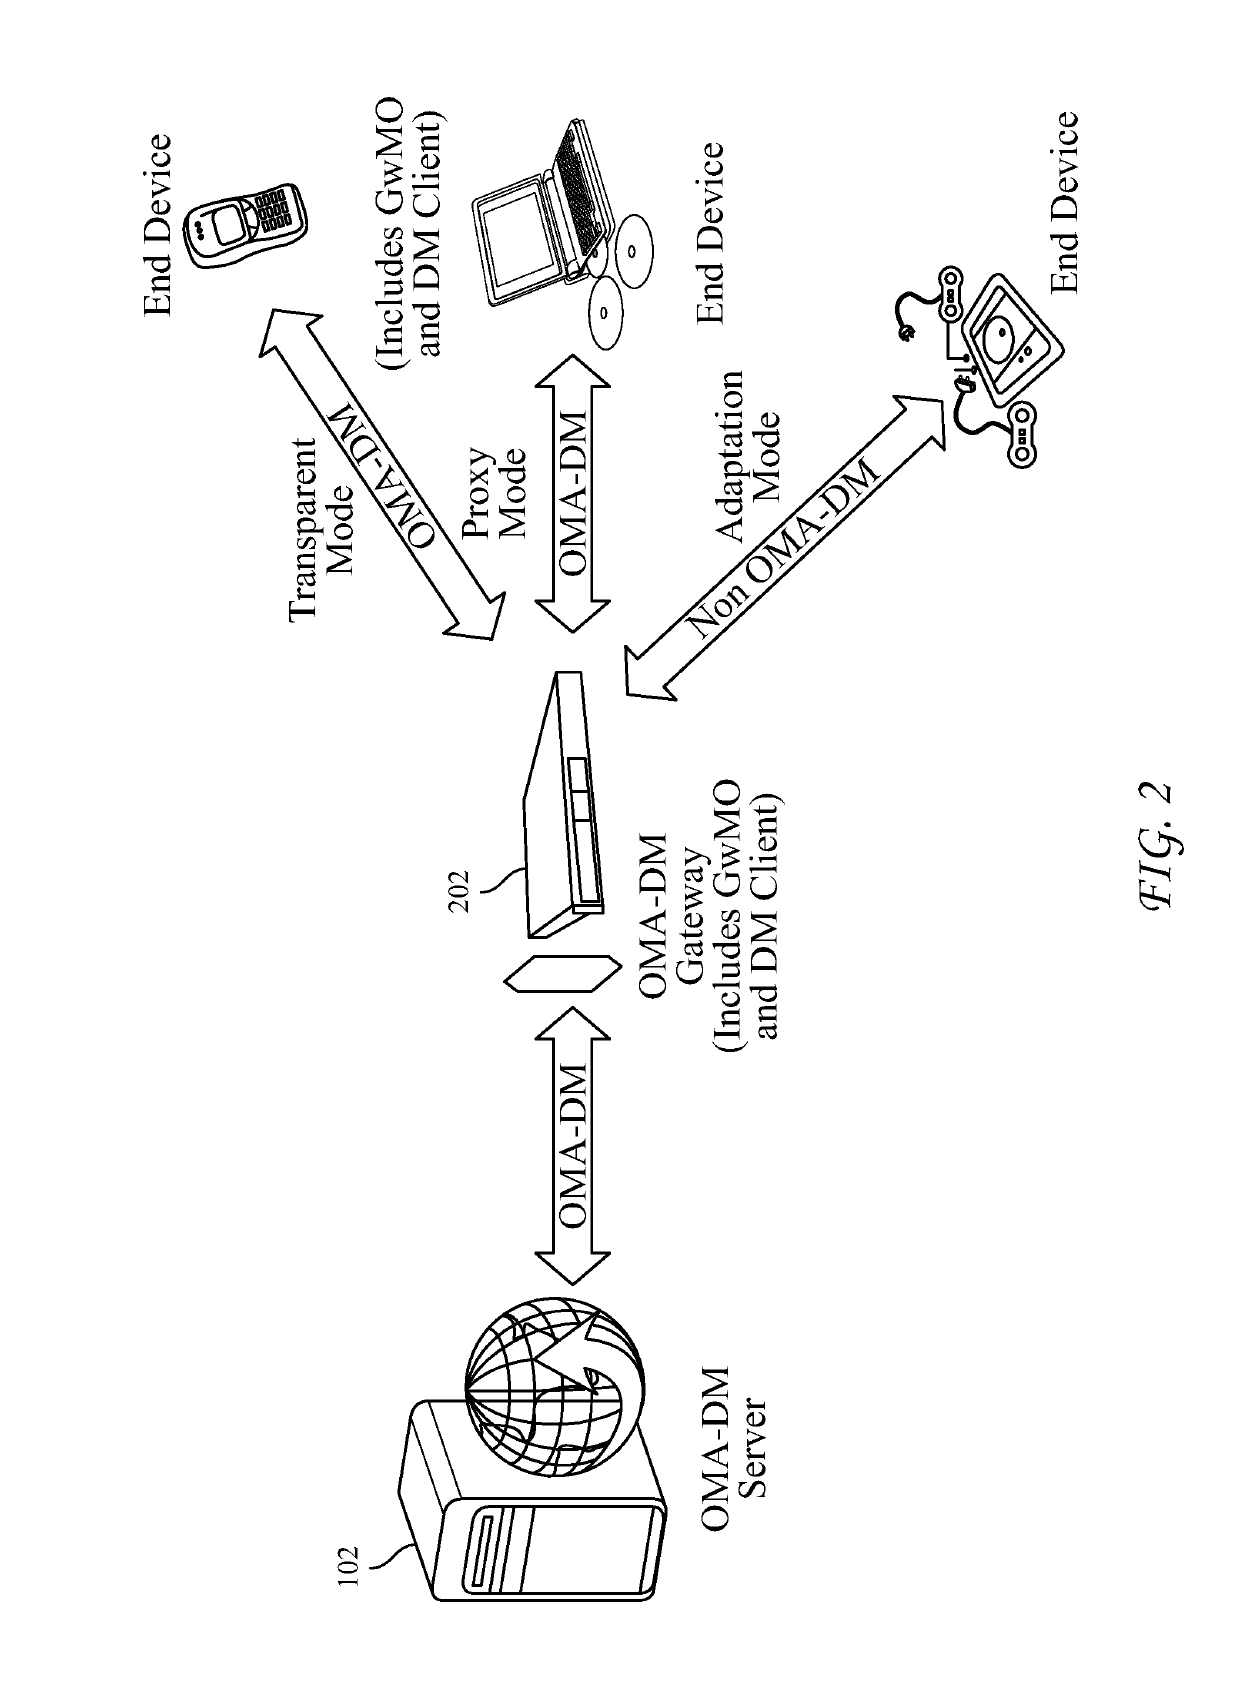 Methods and apparatus for enhancing native service layer device management functionality